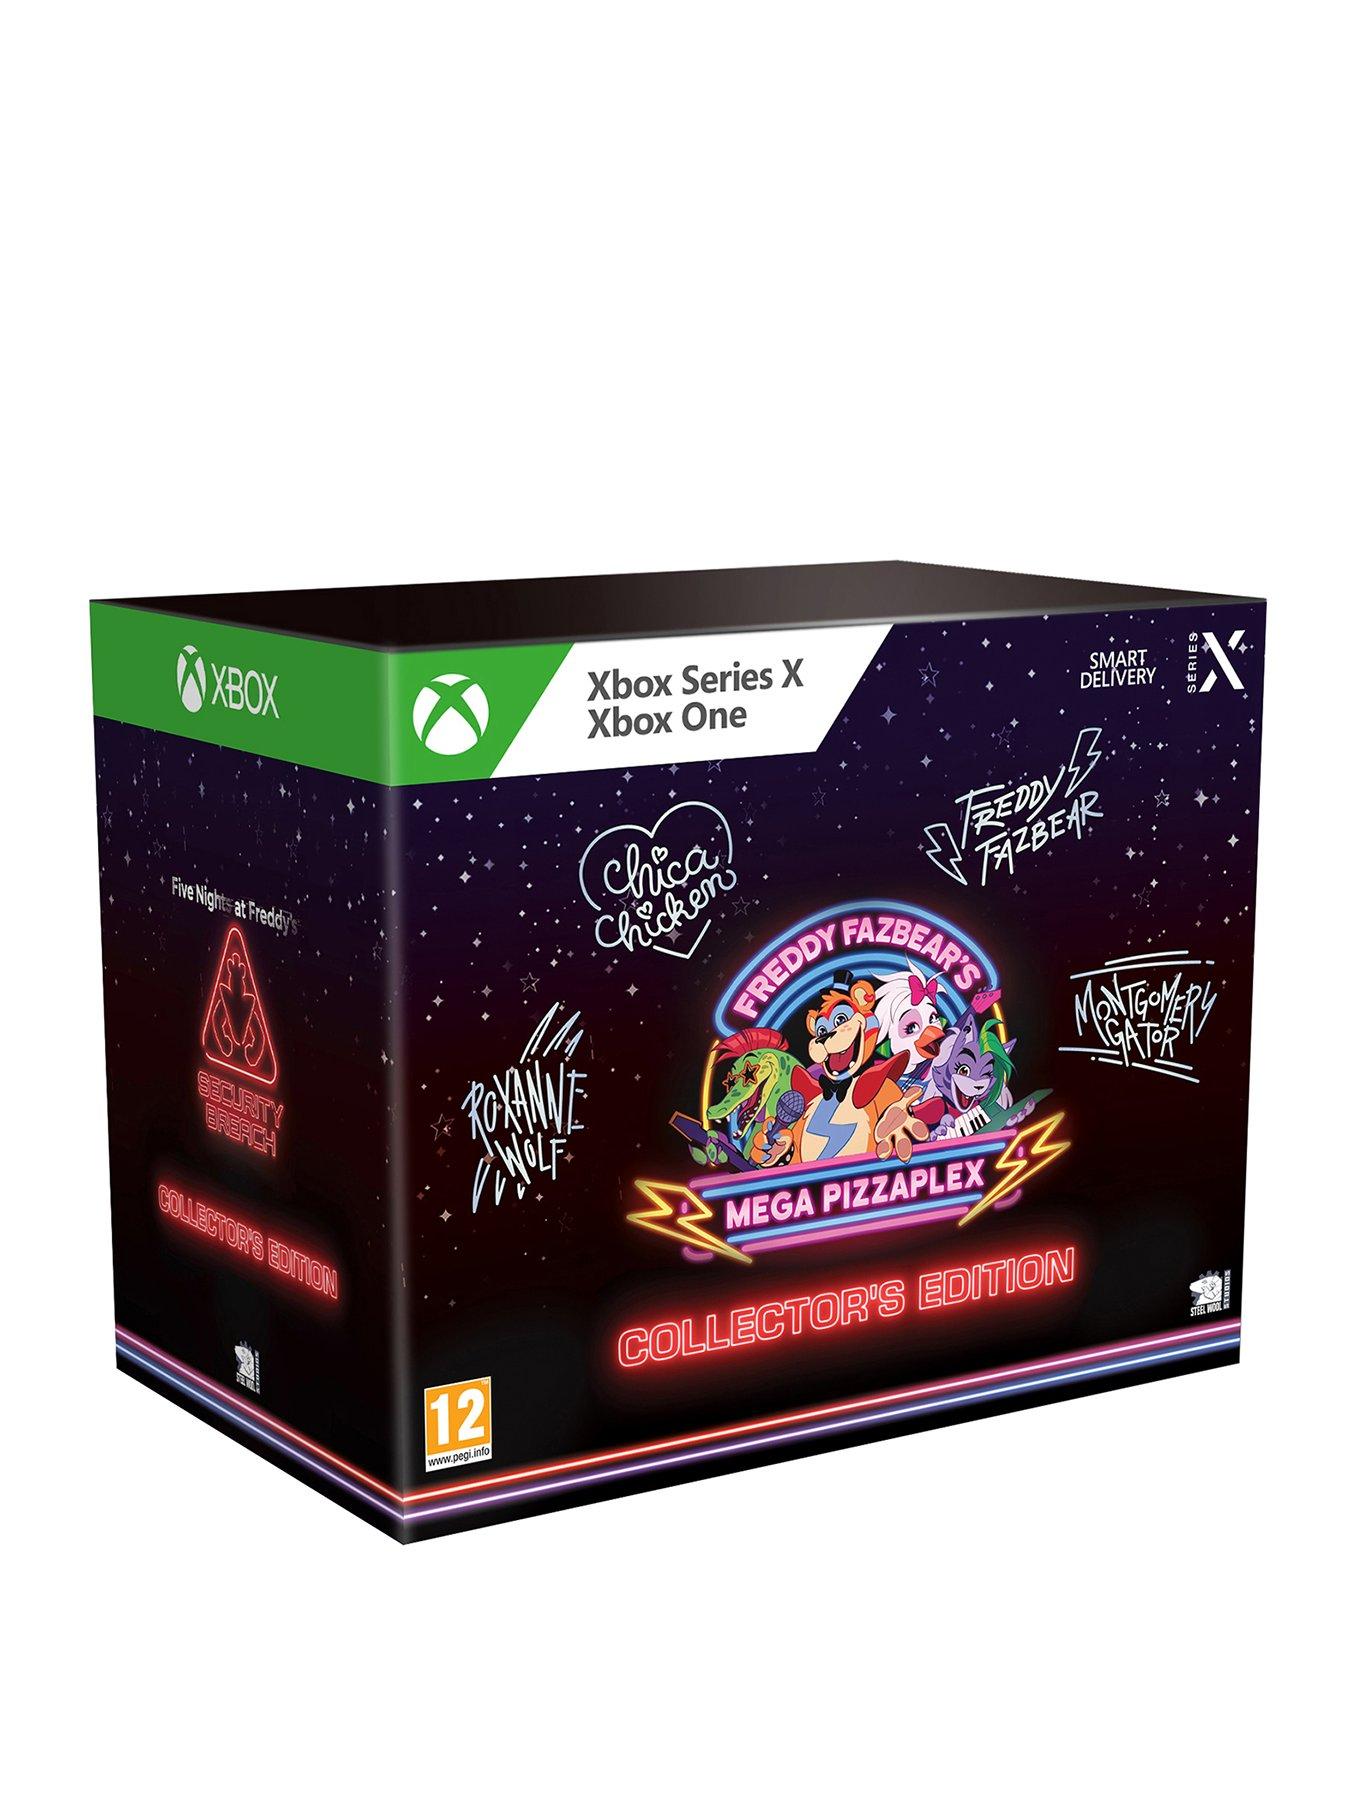 Five Nights at Freddy's: Security Breach (Xbox Series X/Xbox One